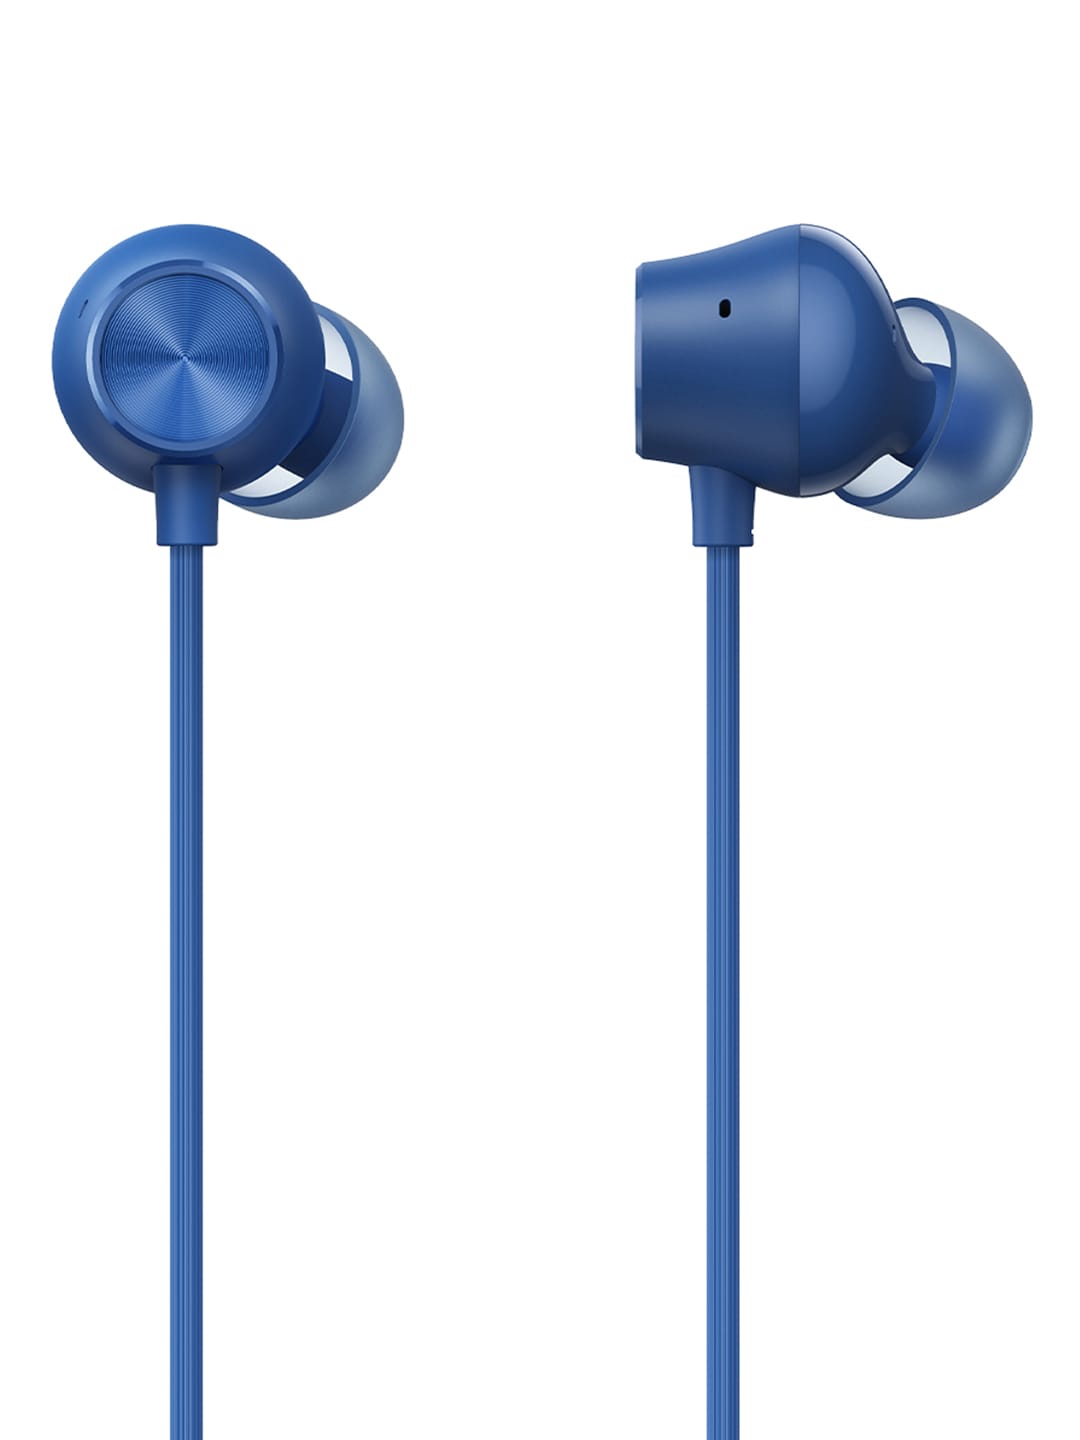 Realme Blue Buds 2 Neo Headphones Price in India